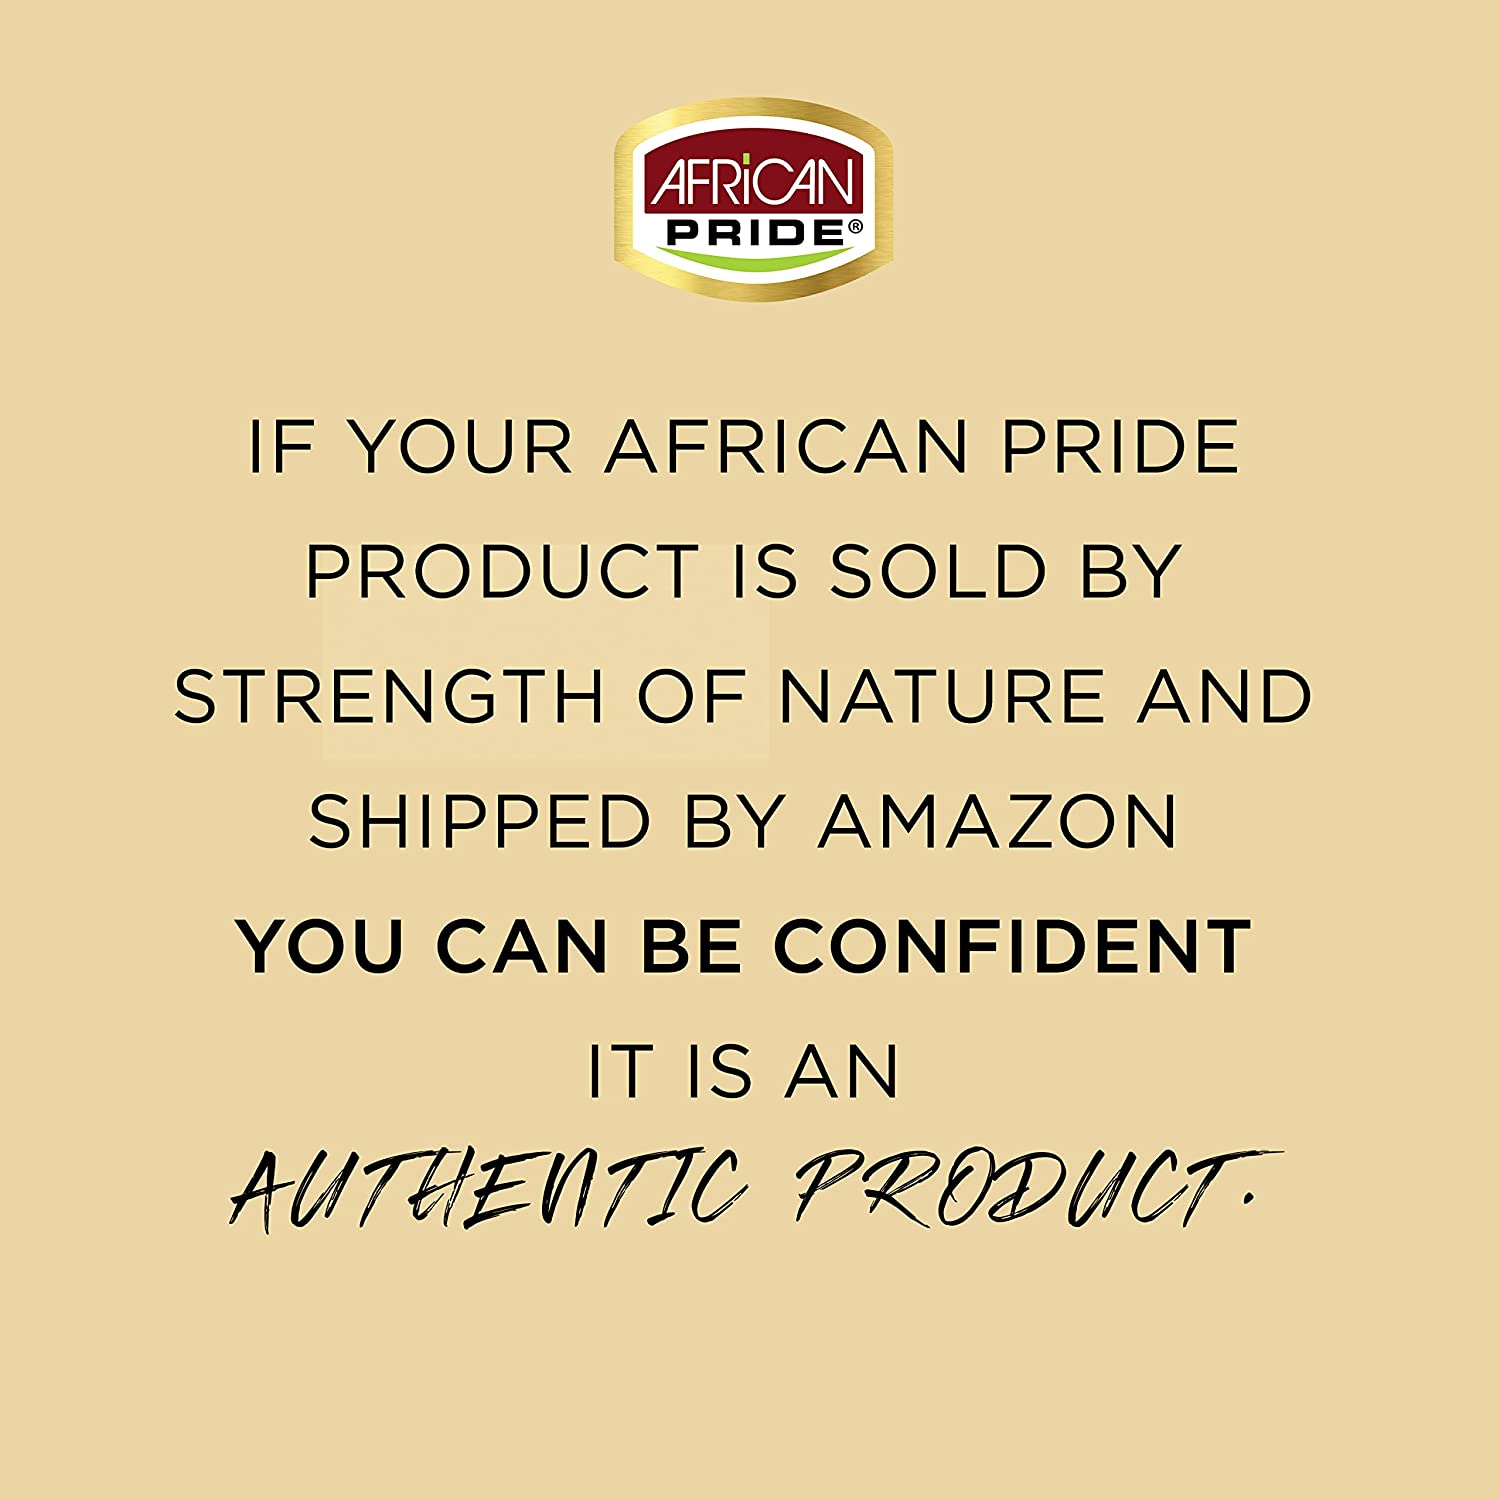 African Pride Moisture Miracle Aloe & Coconut Water Pre-Shampoo - Helps Minimize Hair Breakage for Natural Coils & Curls, Detangles & Conditions, 18 oz.